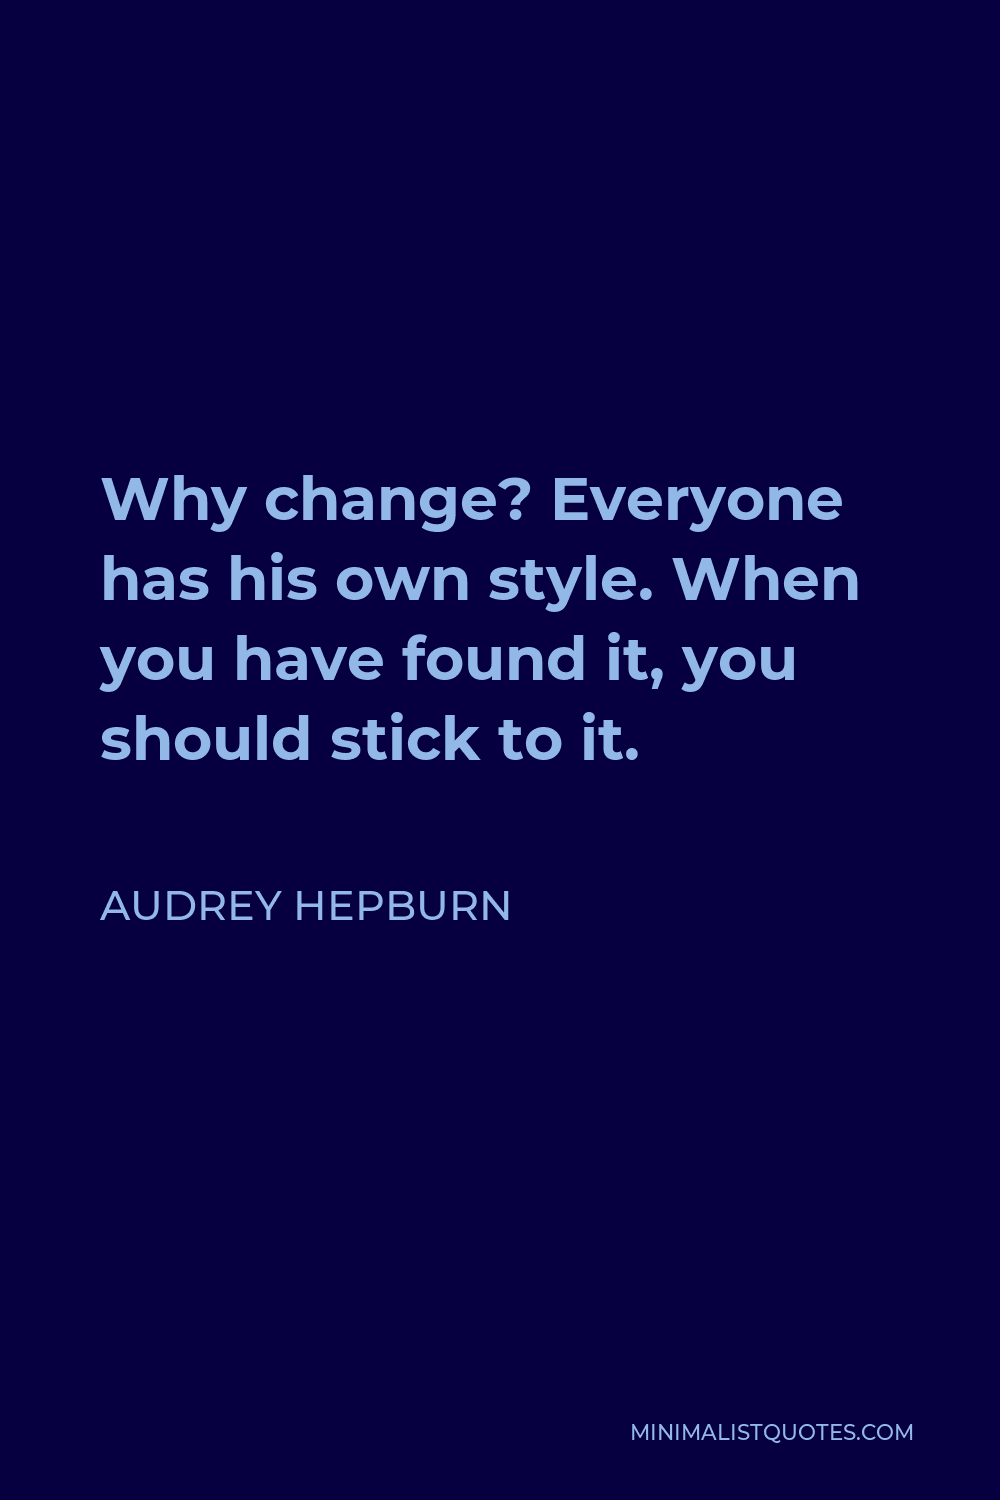 Audrey Hepburn Quote - Why change? Everyone has his own style. When you have found it, you should stick to it.